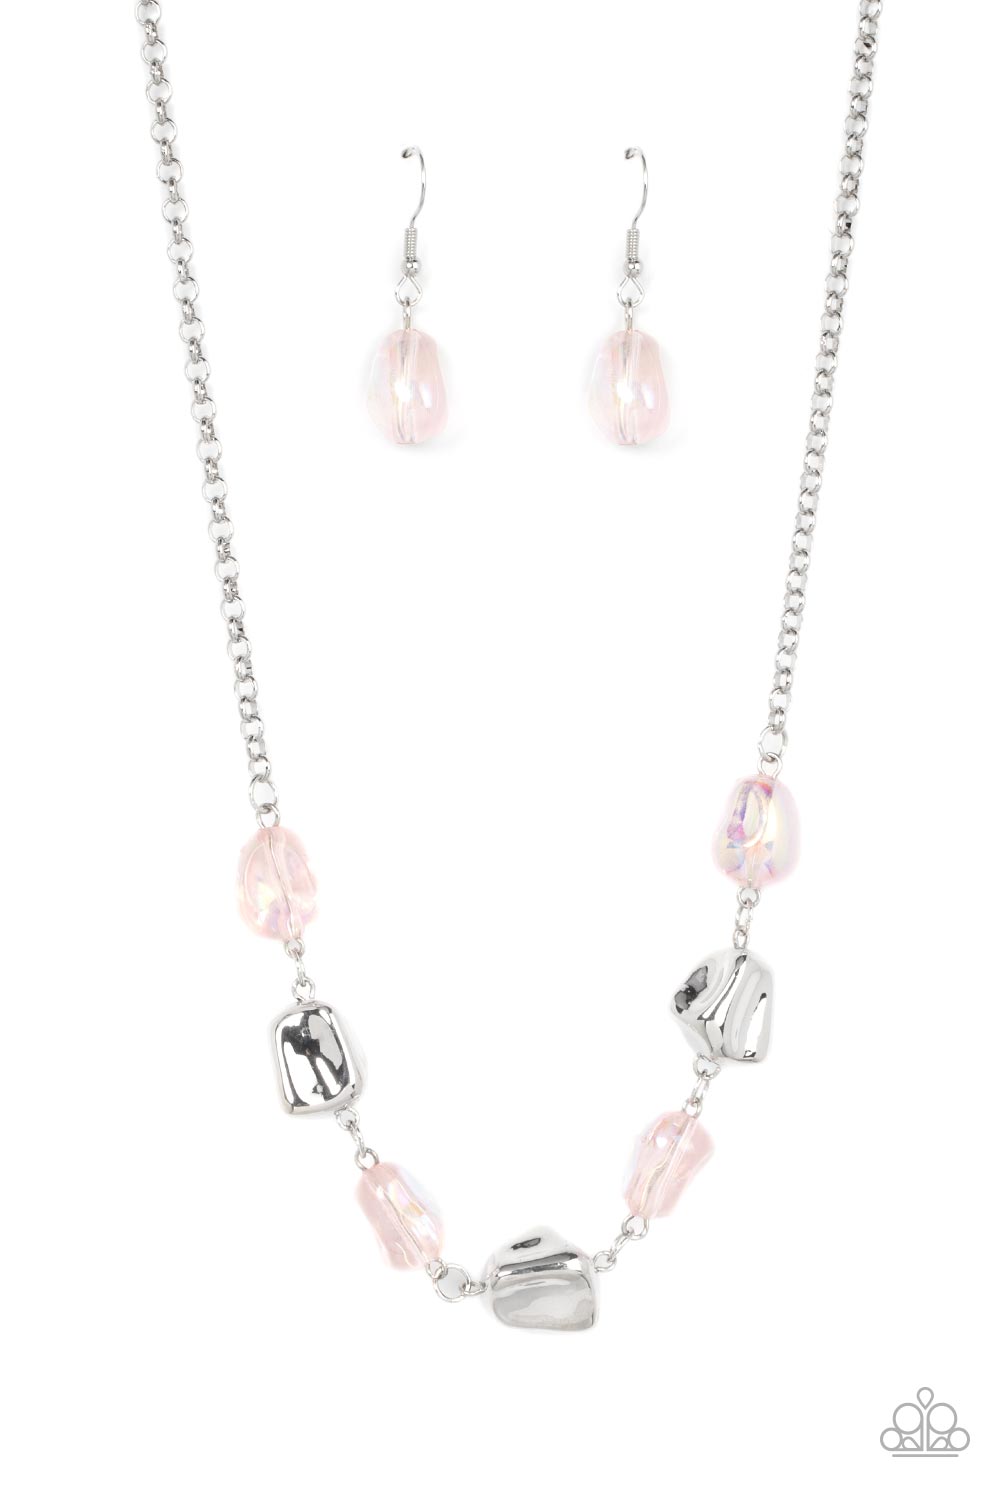 Gemexi on X: Pink jewelry makes being moody, light and fresh. The